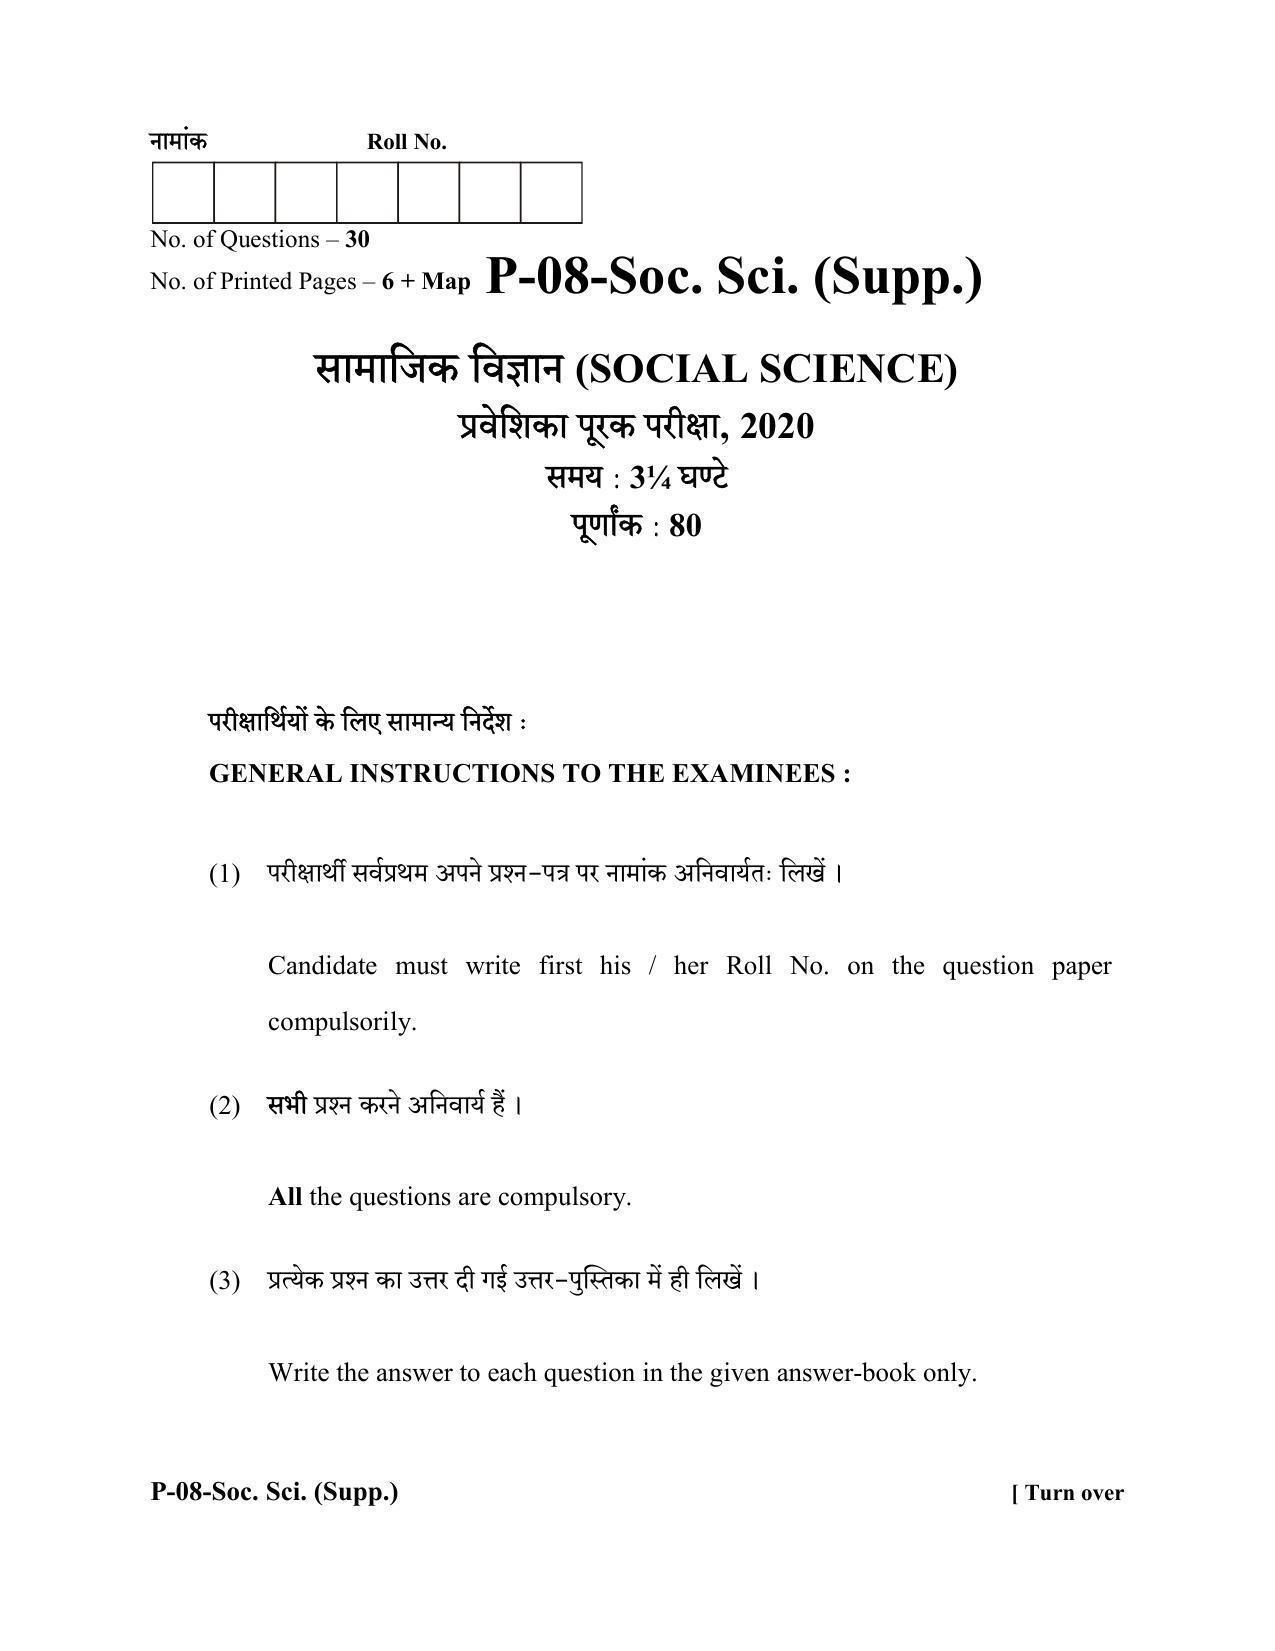 RBSE 2020 Social Science  (SUPPLEMENTARY) Praveshika Question Paper - Page 1